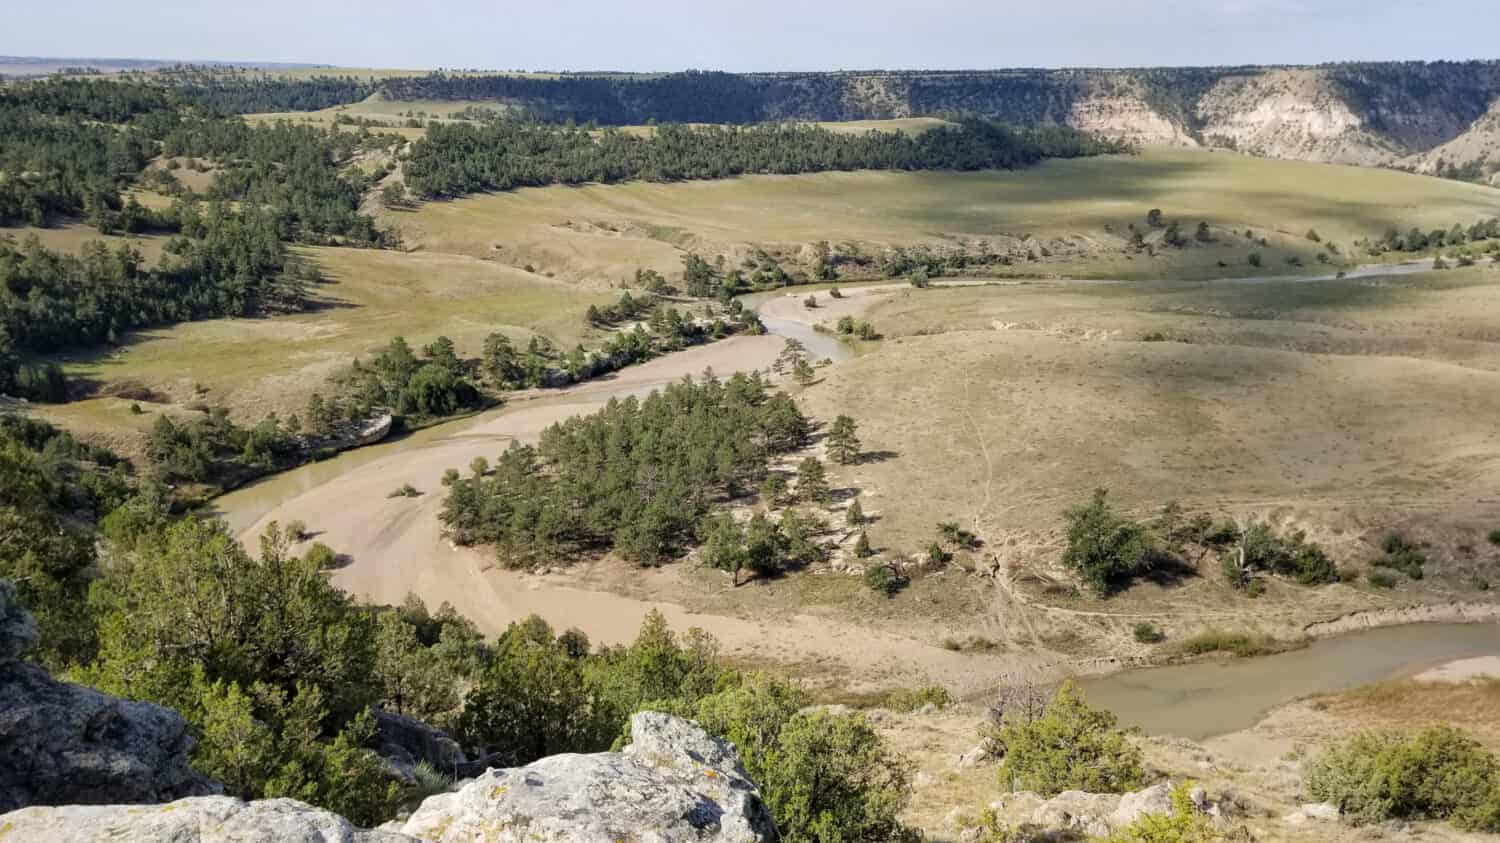 Wide panoramic view of Cheyenne River from viewpoint in Black Hills National Forest.